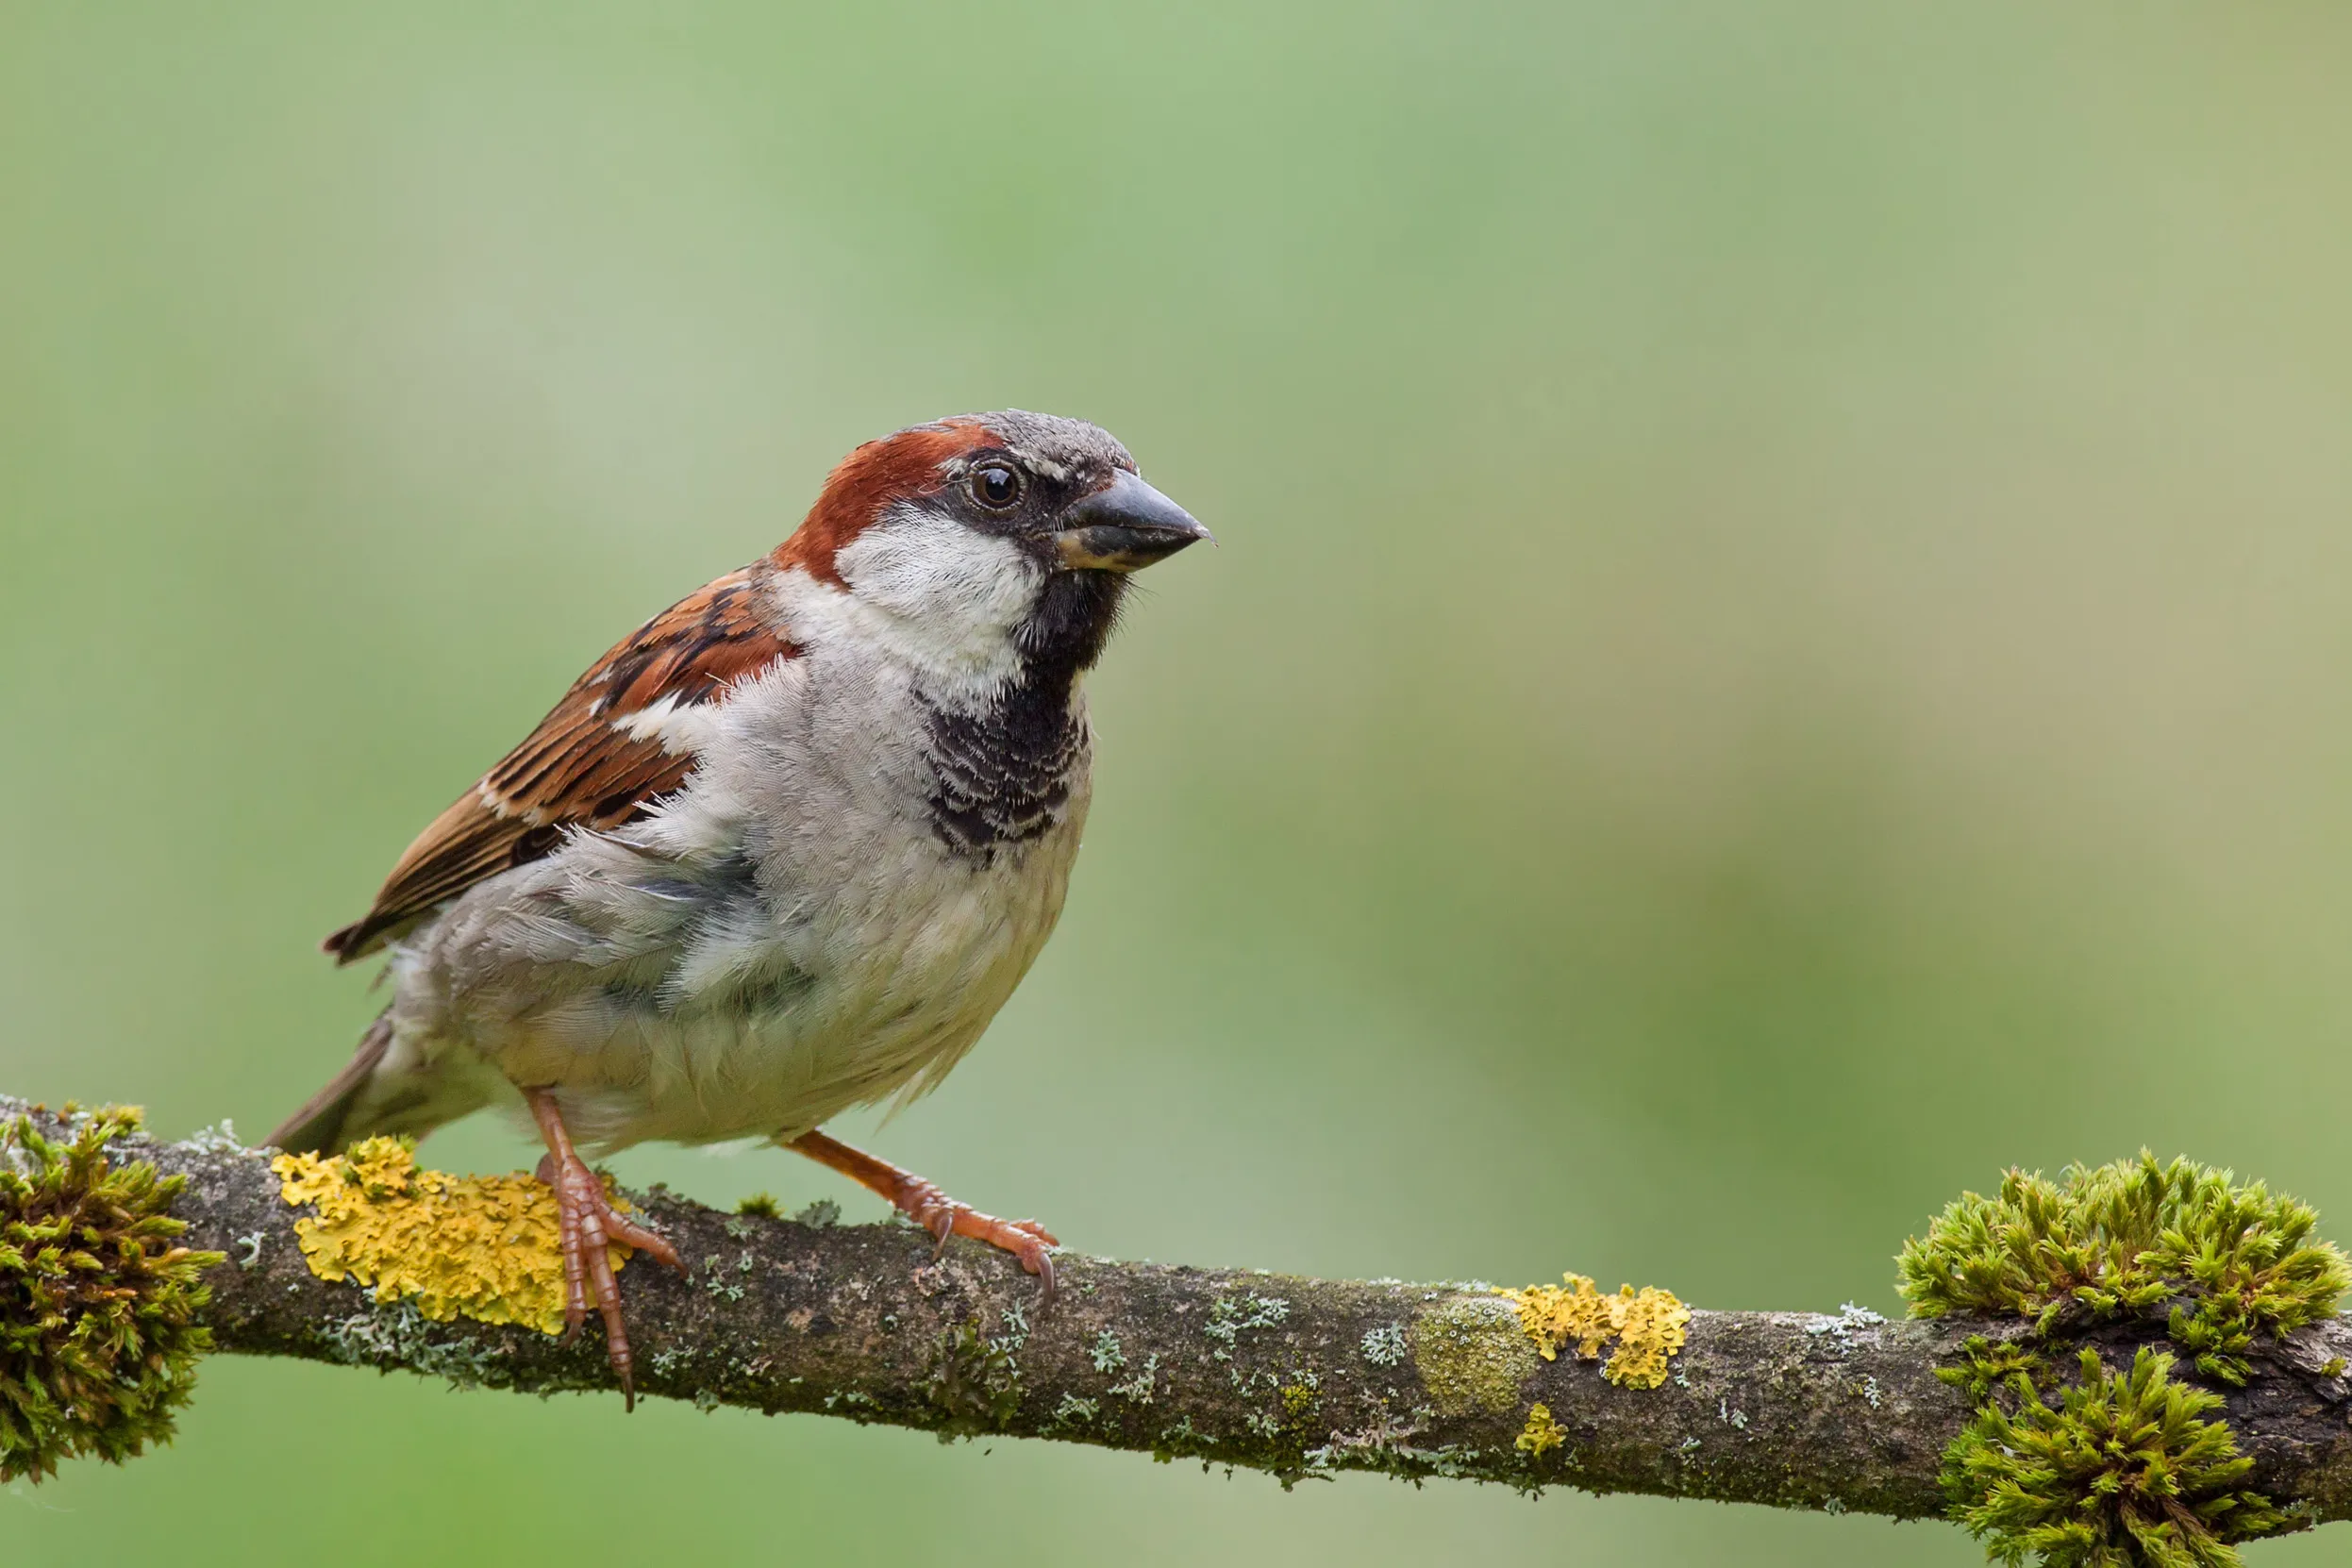 A lone House Sparrow perched on a green moss and yellow lichen covered branch.